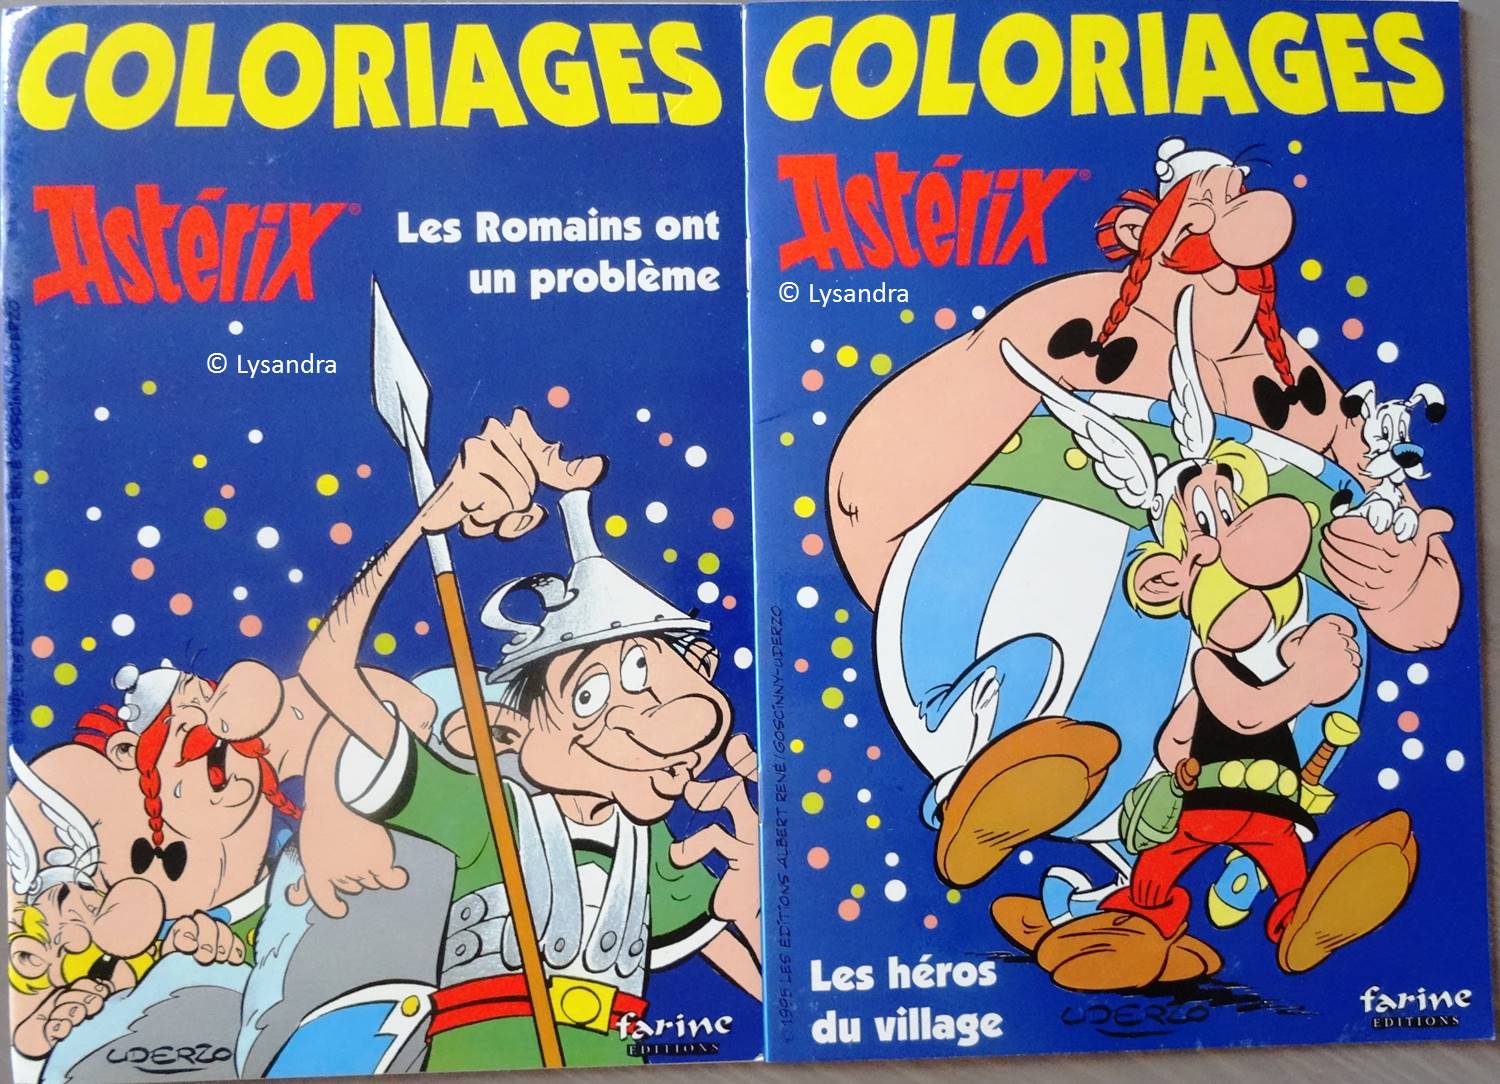 Coloriages Editions Farine QEA9